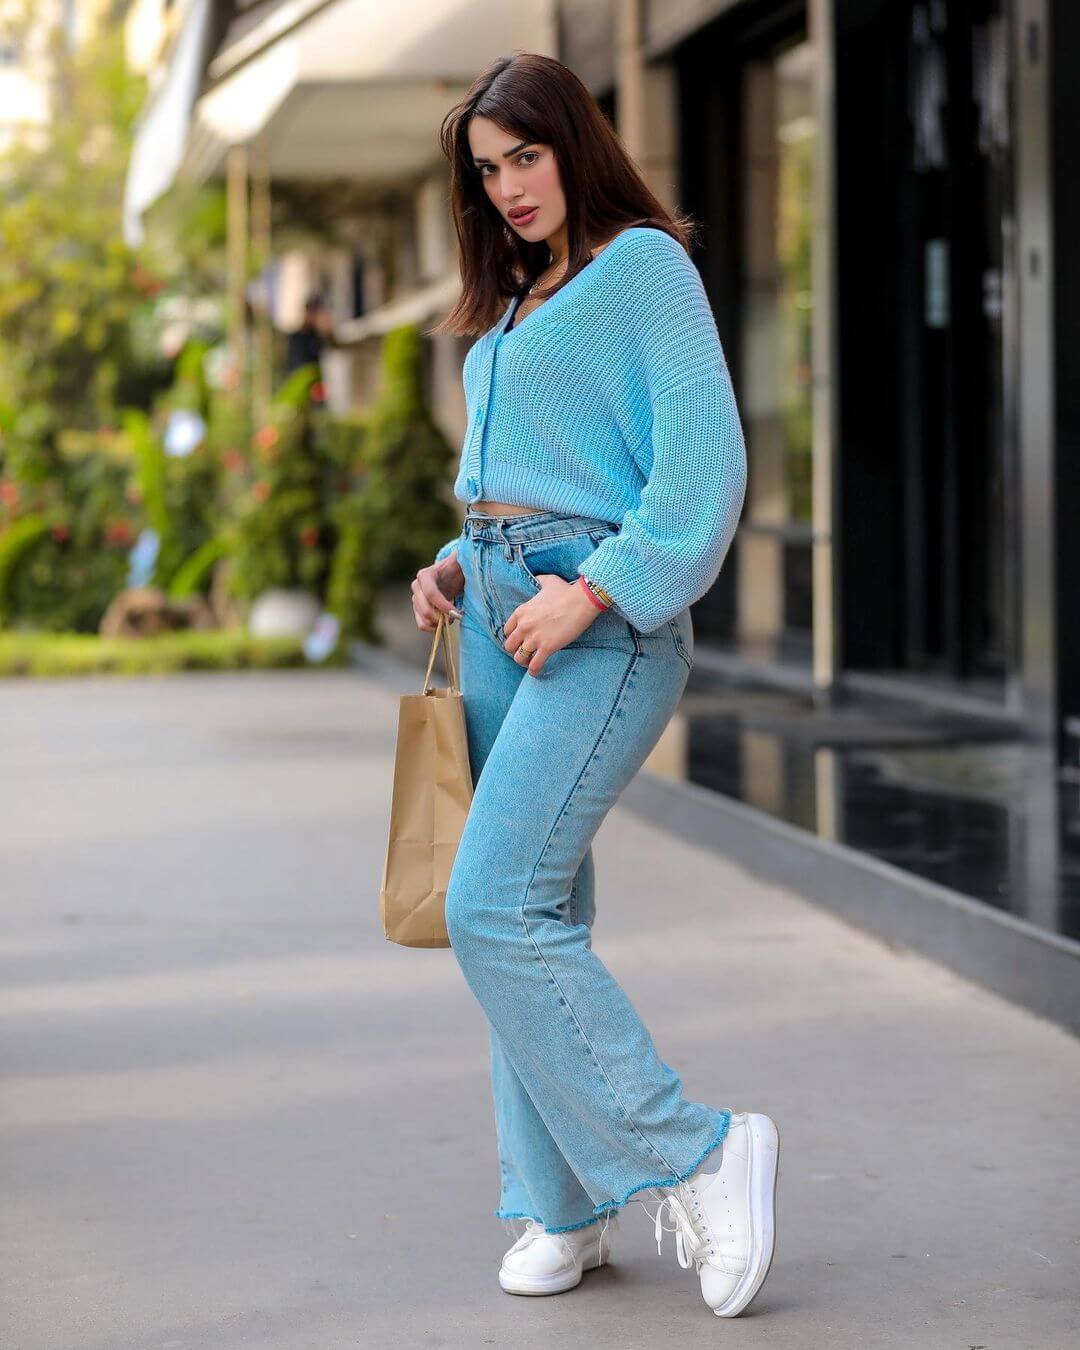 Bouchra Ounida In Woven Top With Denim Jeans